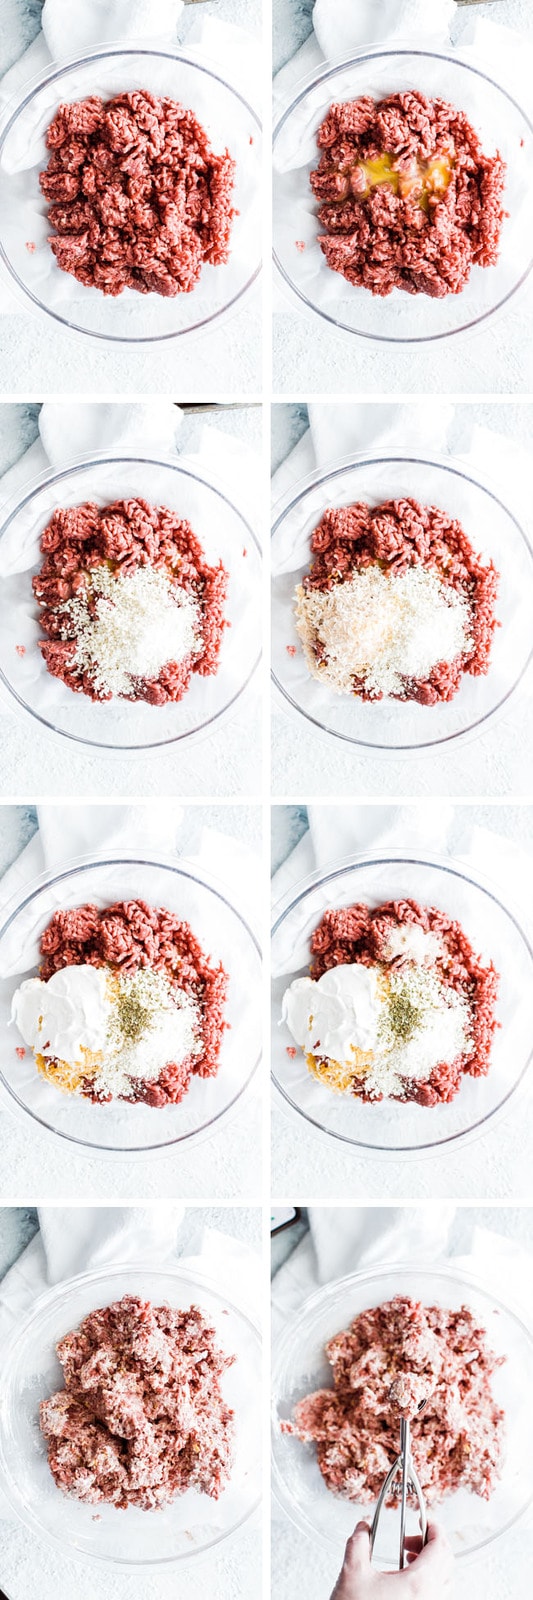 8 step by step photos of how to make homemade meatballs